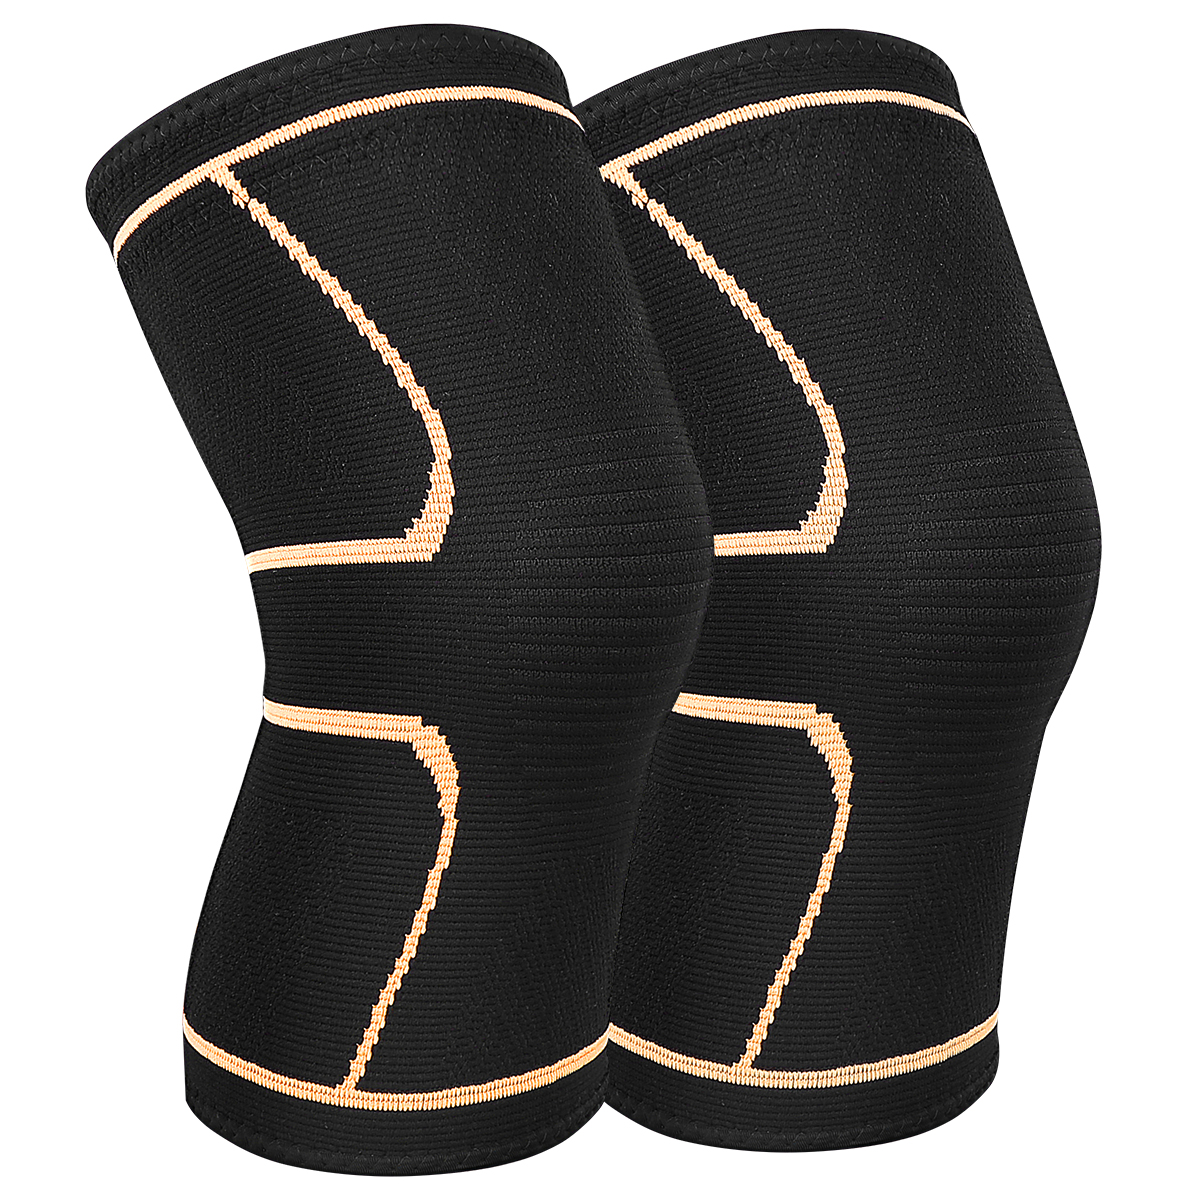 Knee Brace Support Pair for Men Women, AVIDDA Copper Compression Knee Sleeve for Joint Pain Relief, Arthritis, Meniscus Tear, Injury Recovery, Running, Squats, Weight Lifting, Football Gold XL